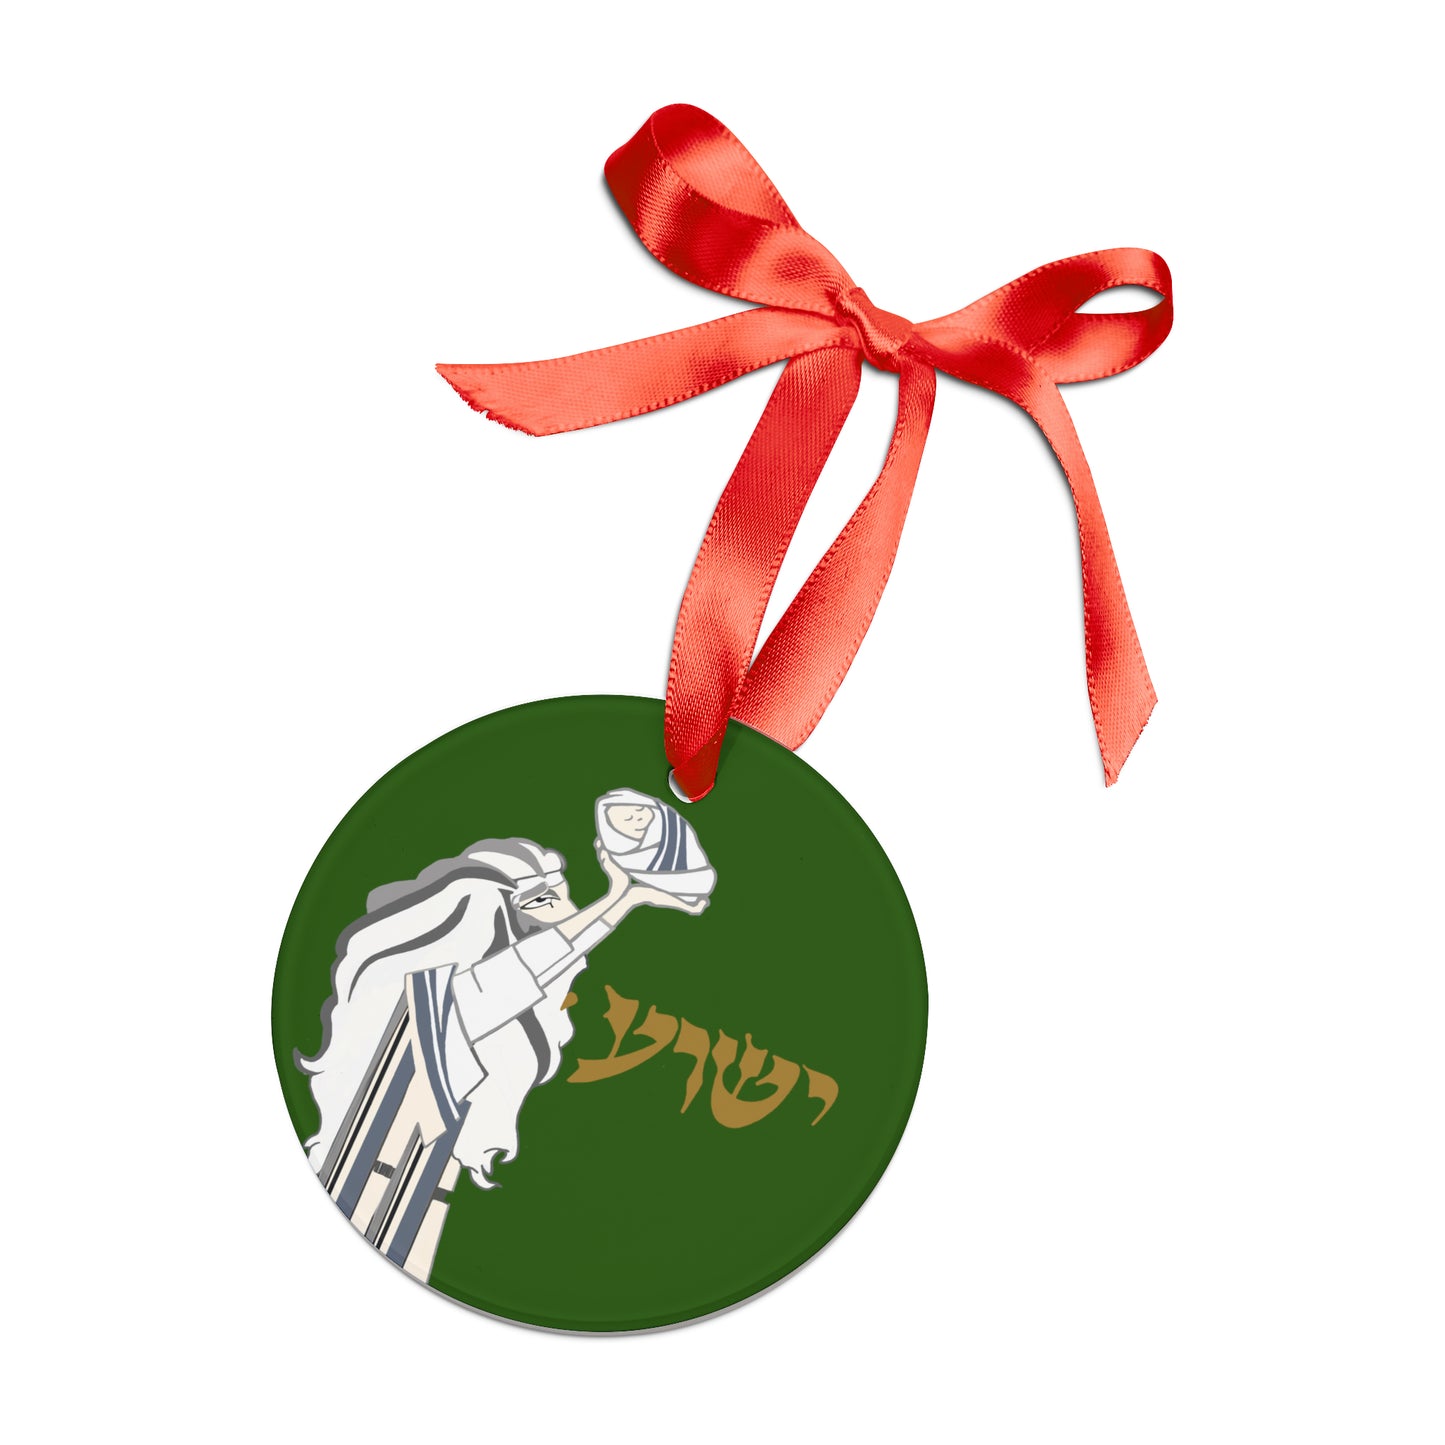 The Child / Green Acrylic Ornament with Ribbon